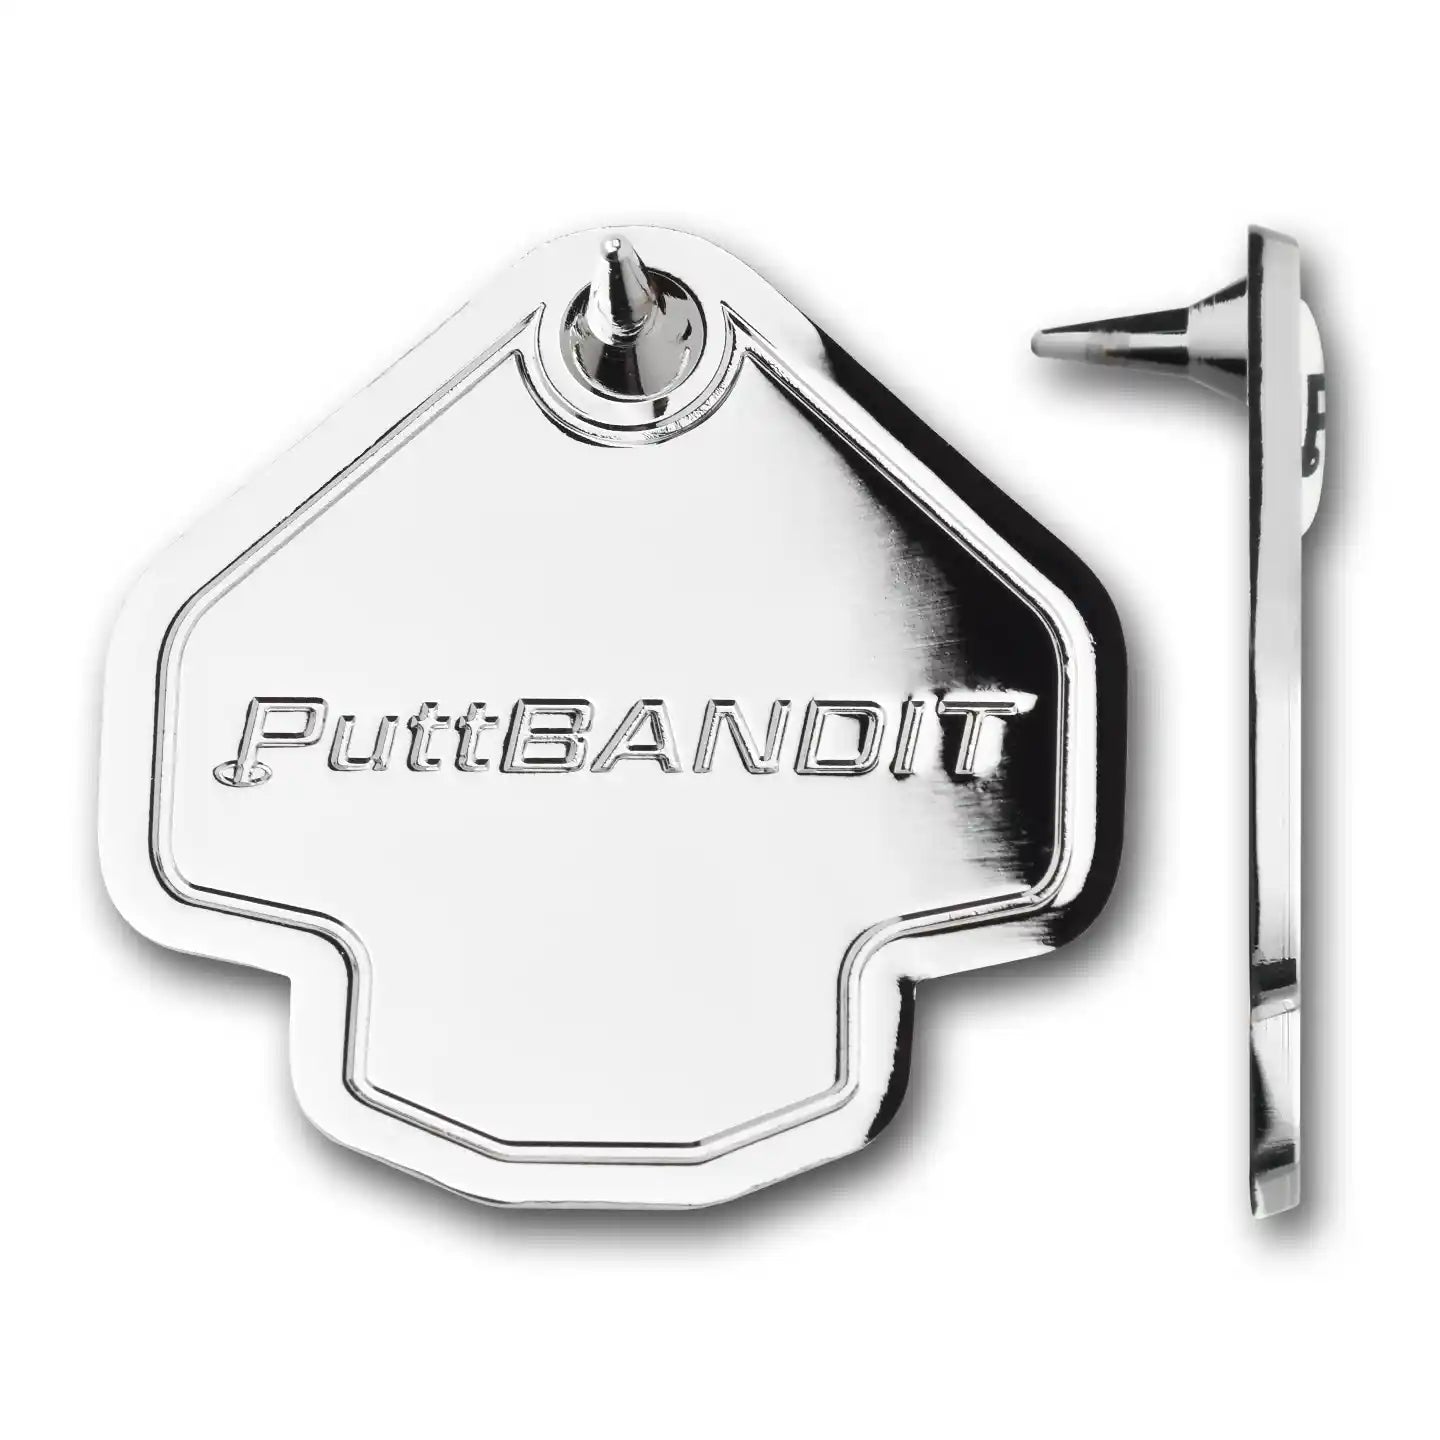 PuttBANDIT LP polished baseplate with profile view